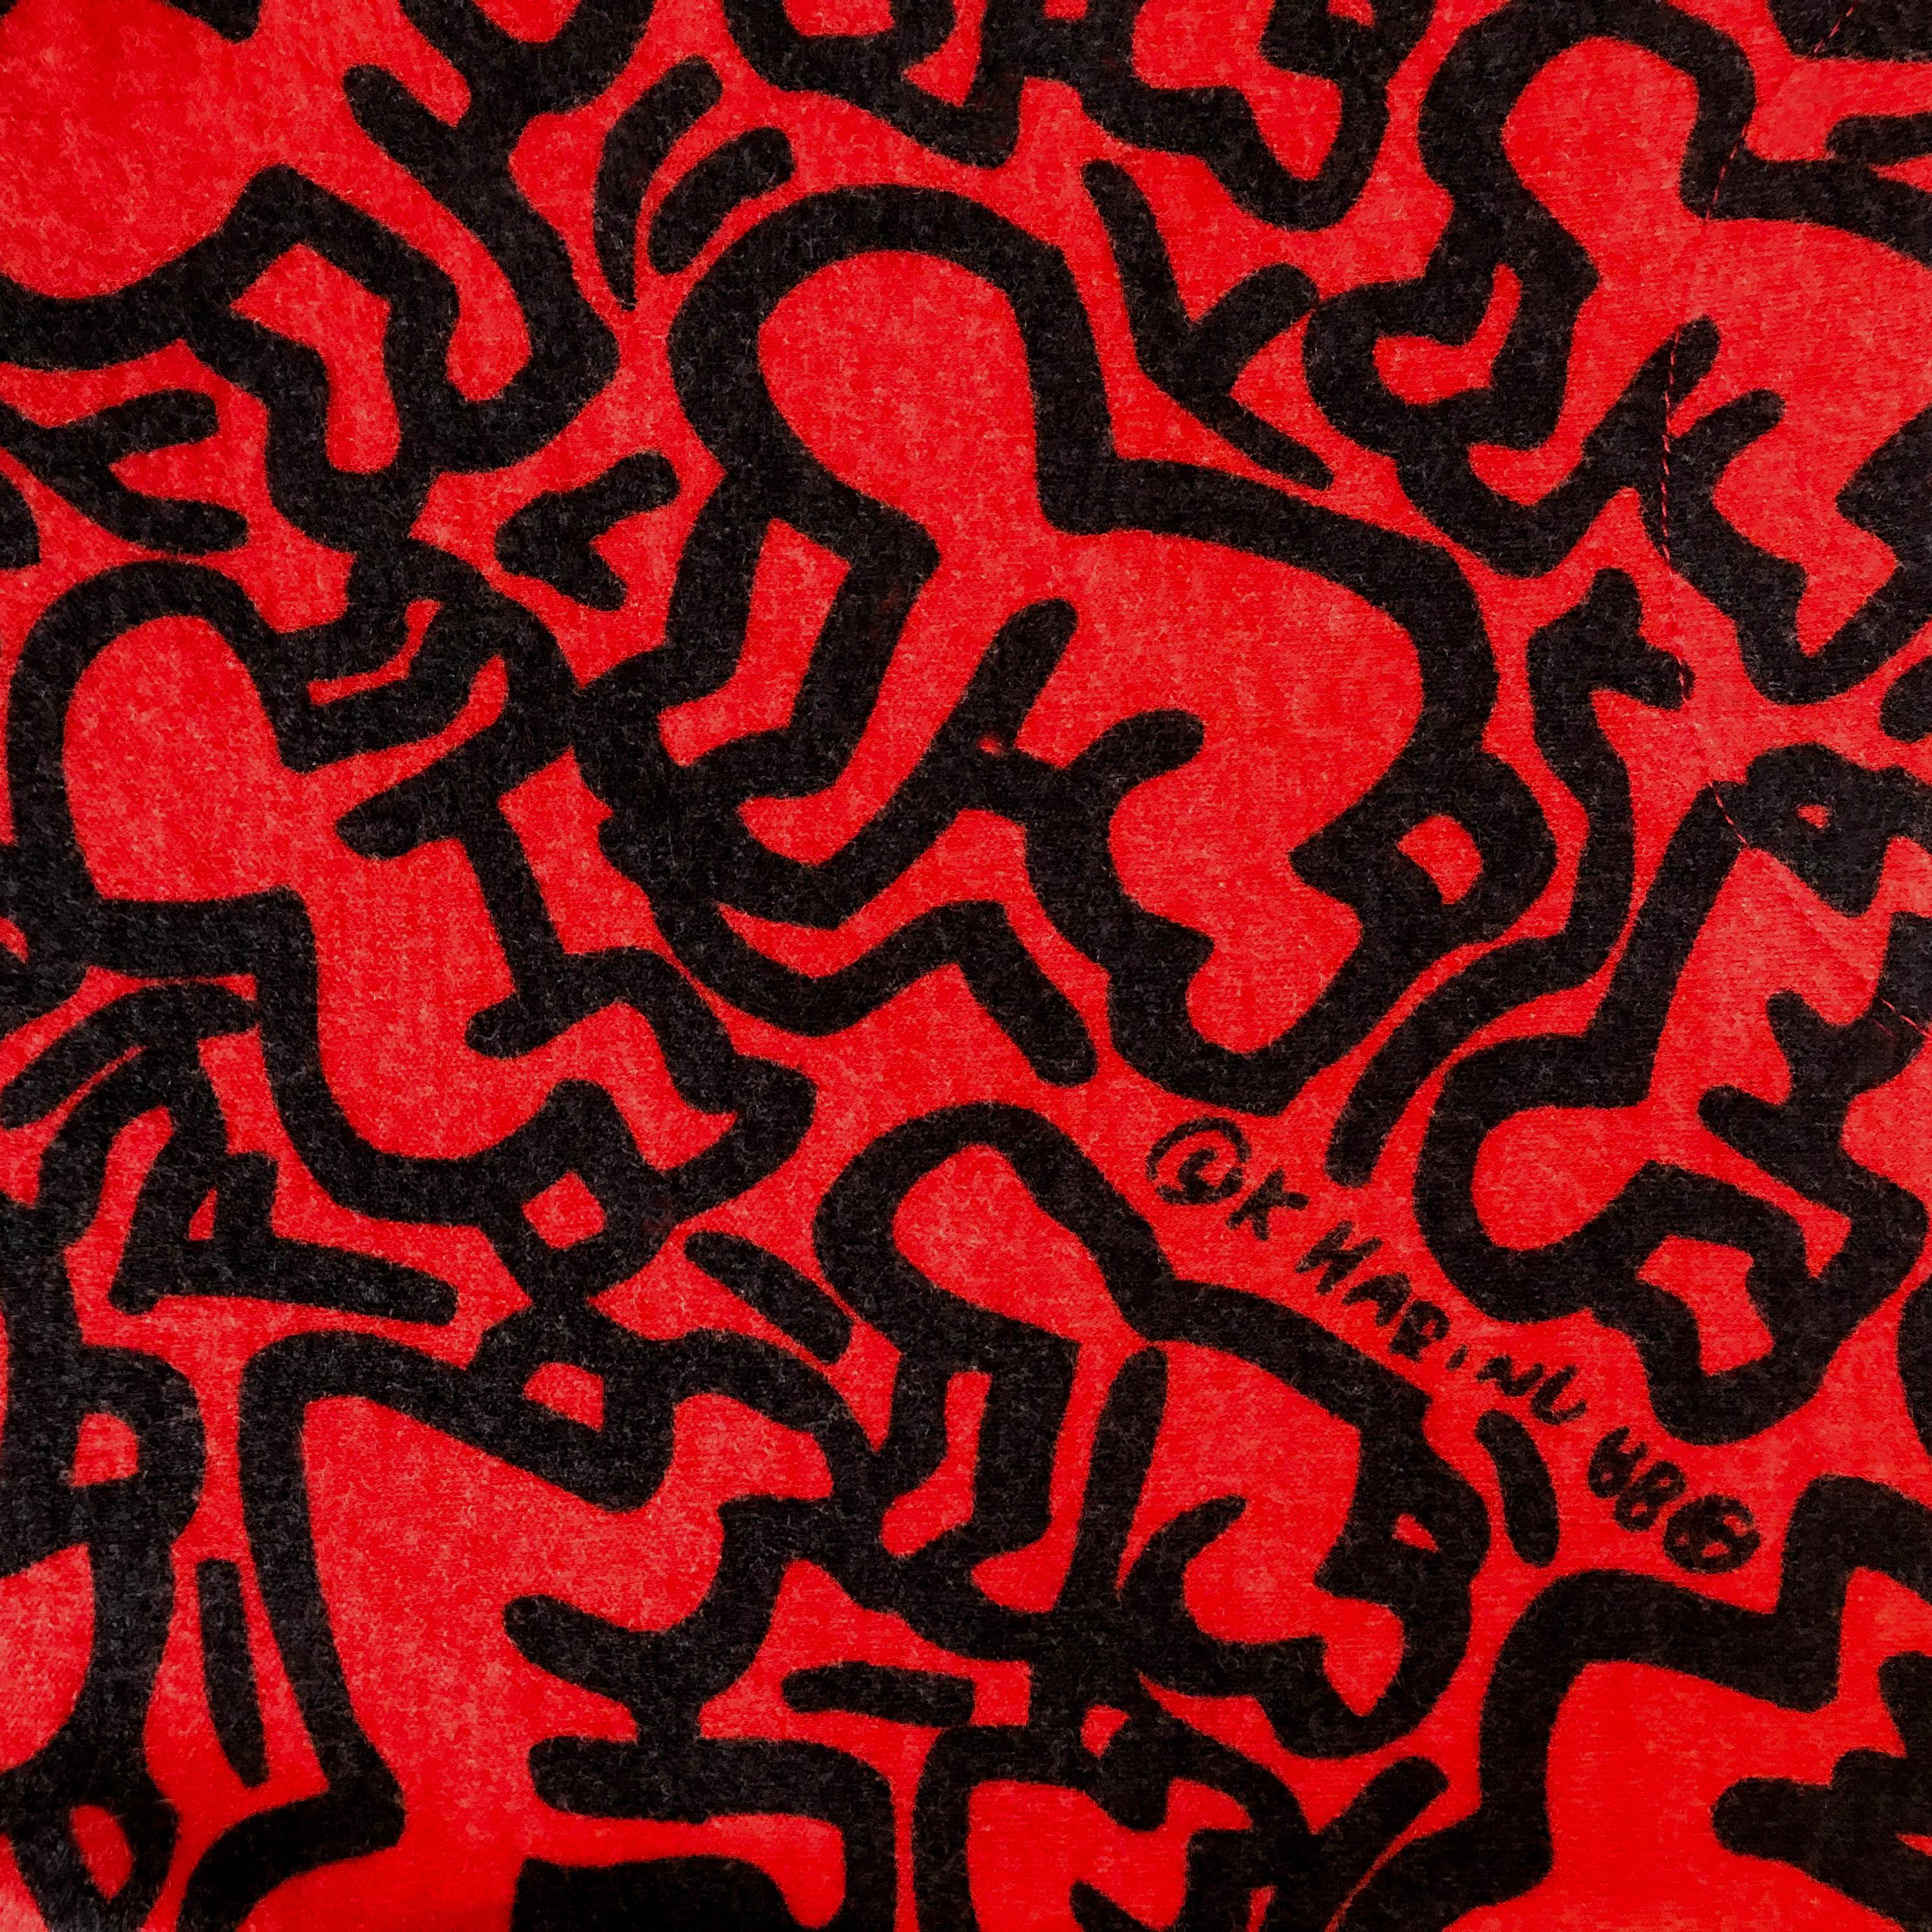 Product Details: JC de Castelbajac x Keith Haring - Rare 1990s Vintage - Stretch Knit - Roll / Cowl Neck Jumper - Red + Black ‘Keith Haring Baby’ Print Stretch Knit 
Era: c.1990
Label: JC de Castelbajac x Keith Haring
Size: 42 (Fits UK 10 to UK